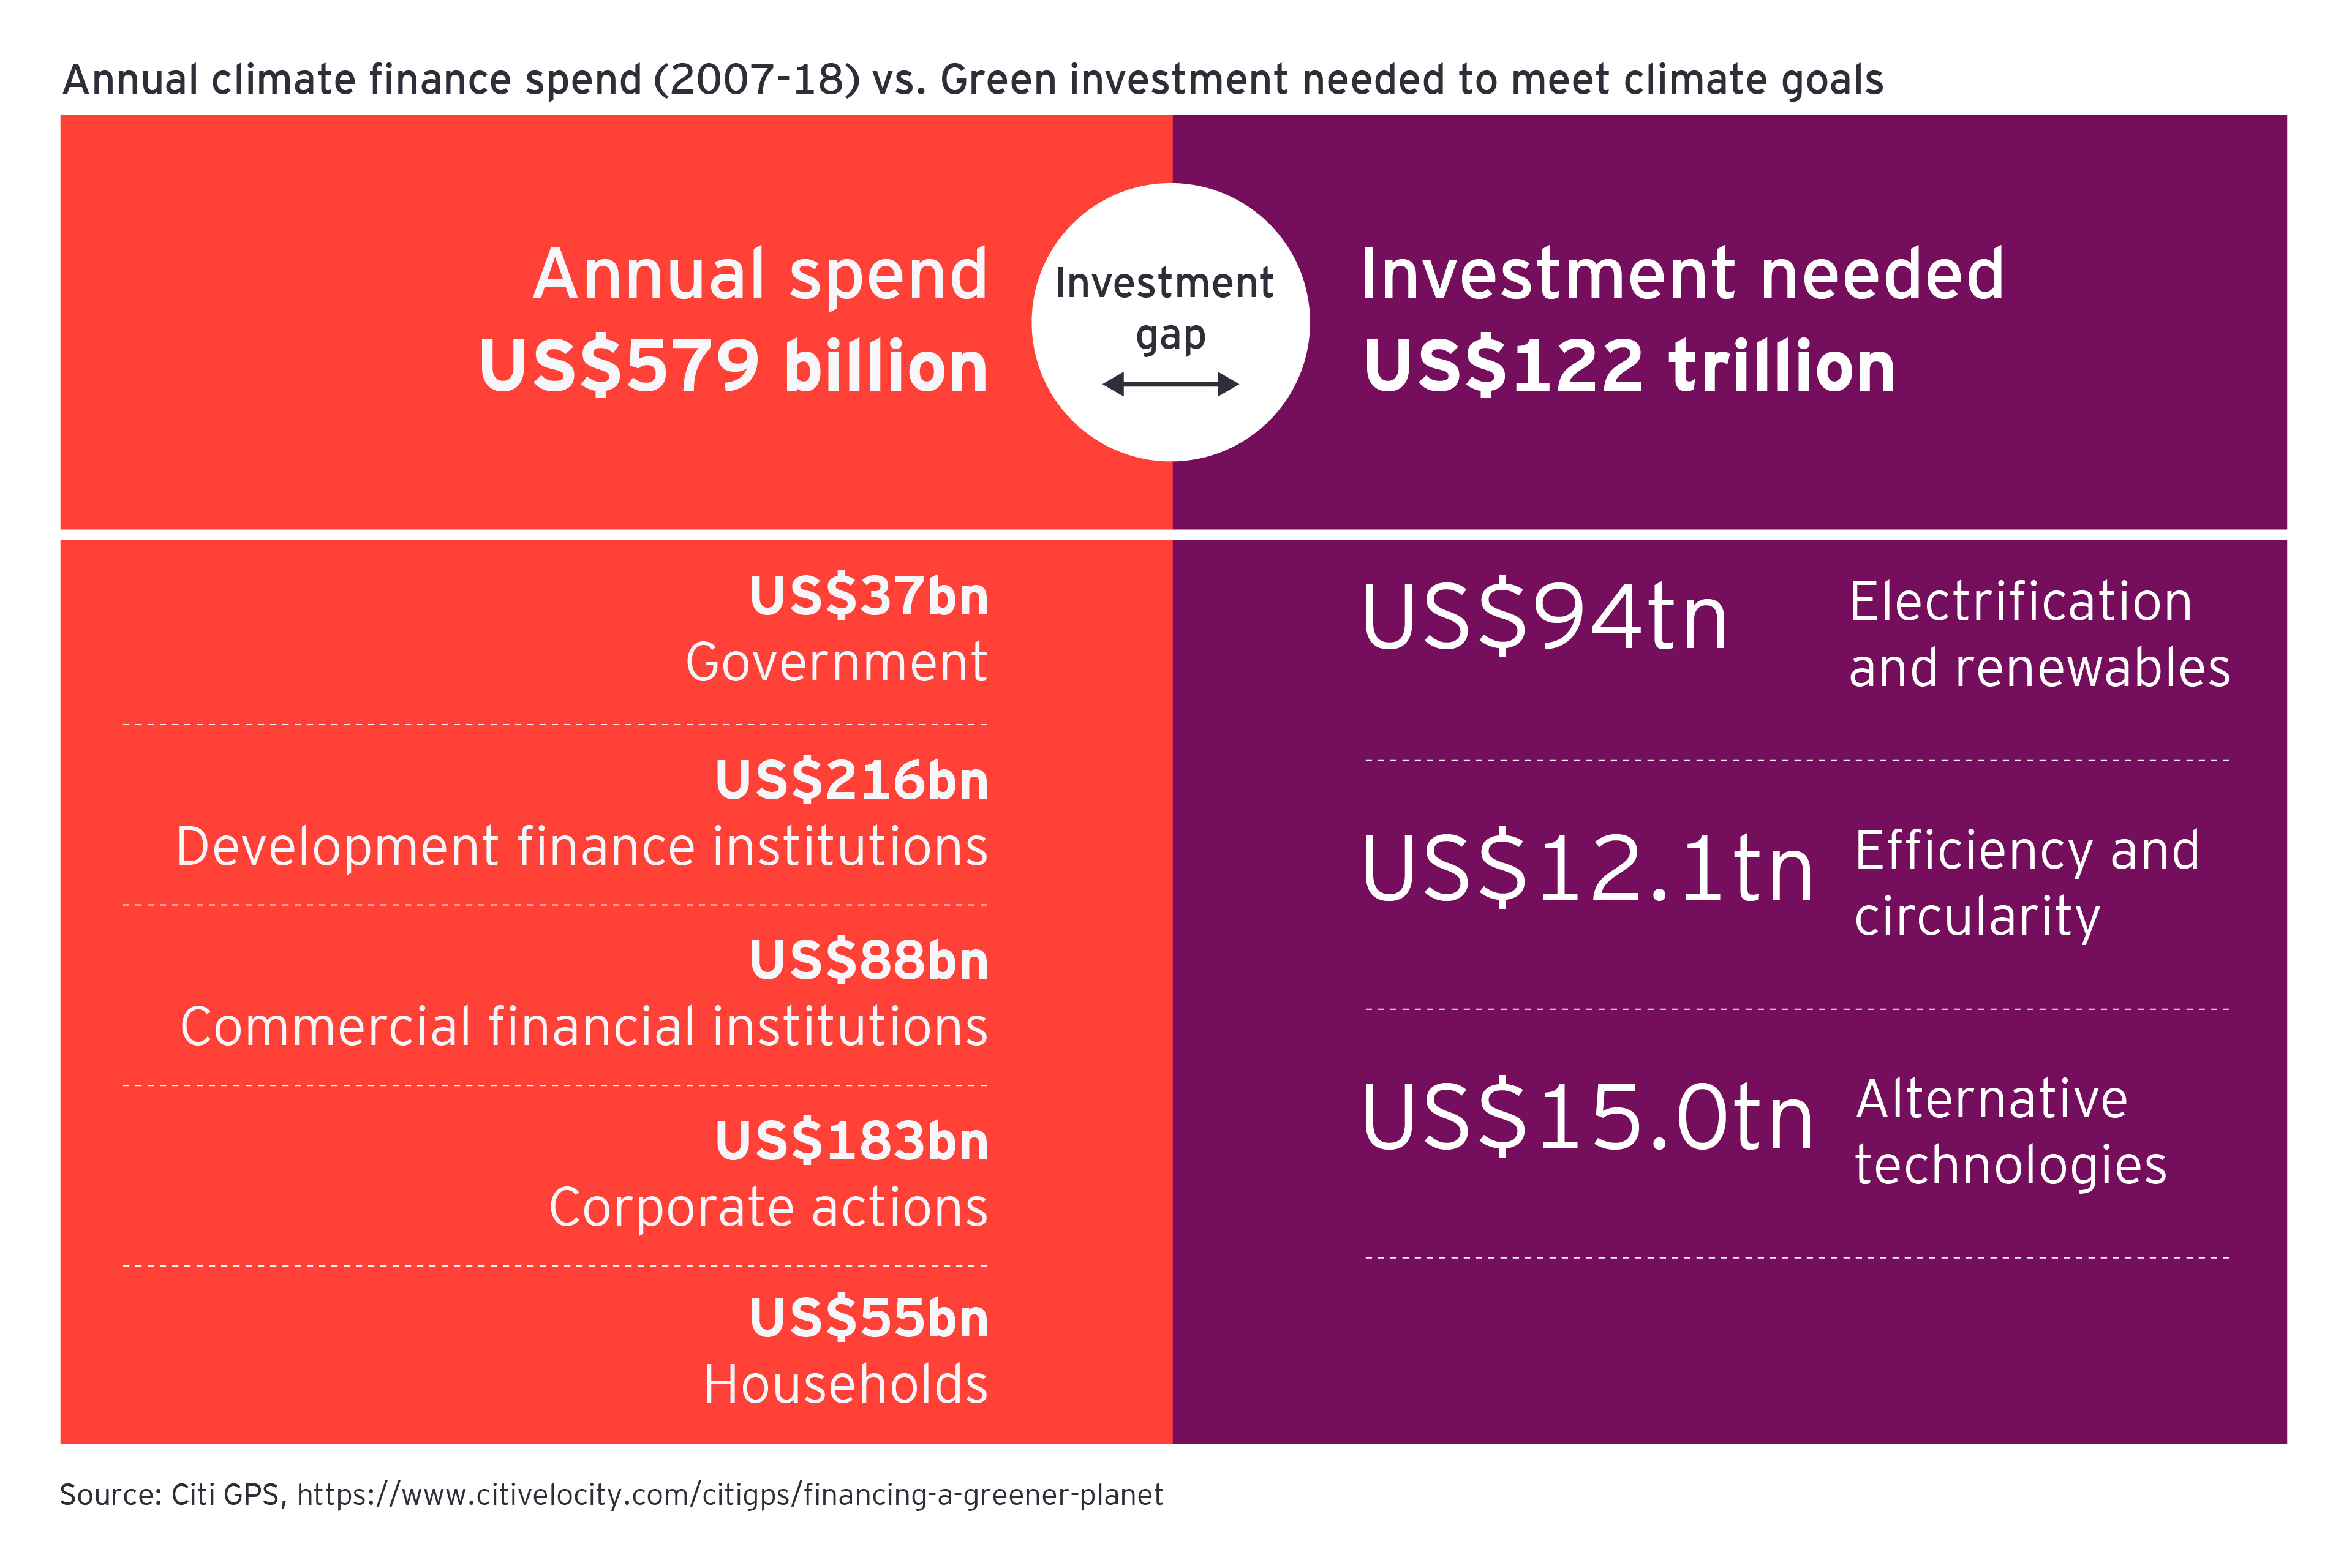 Chart showing annual climate finance spend (2017-18) vs. green investment needed to meet climate goals.